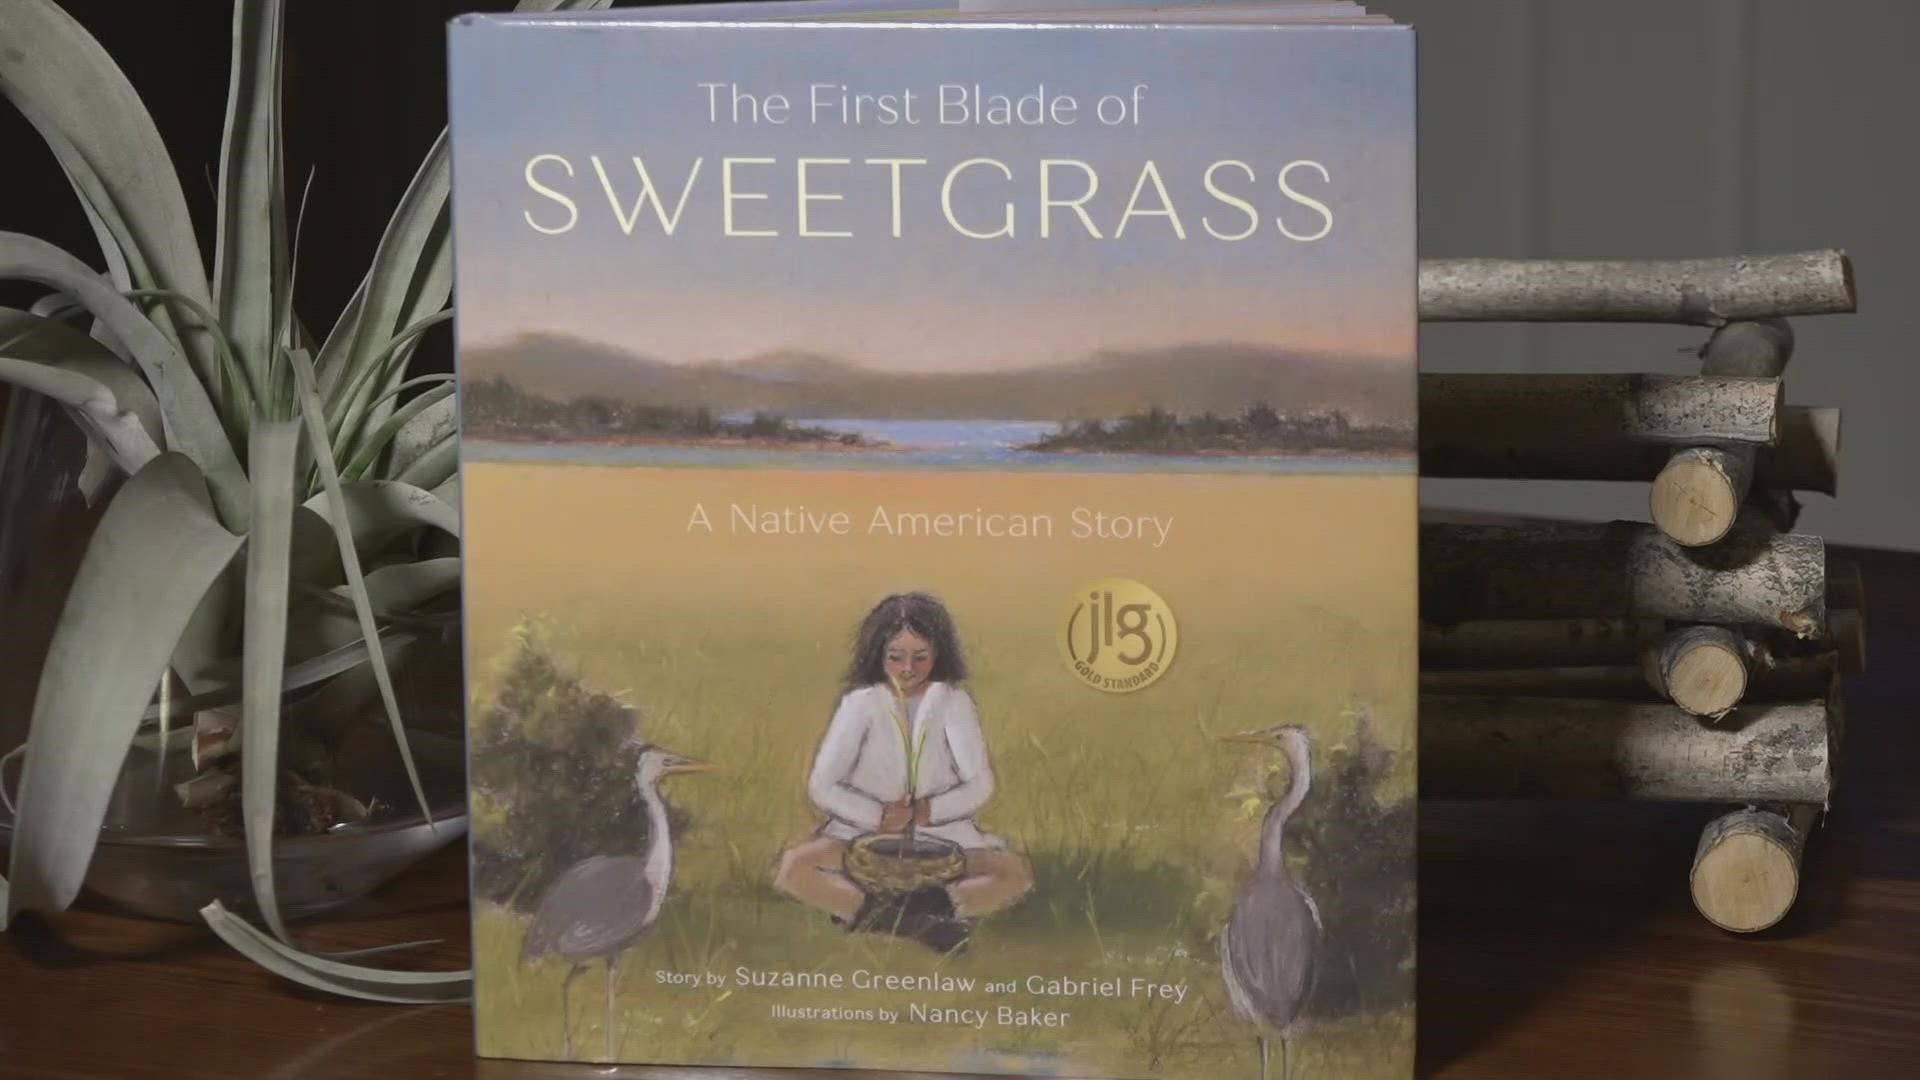 Suzanne Greenlaw and Gabriel Frey's first children's book is a story about the Wabanaki traditions of harvesting sweetgrass.